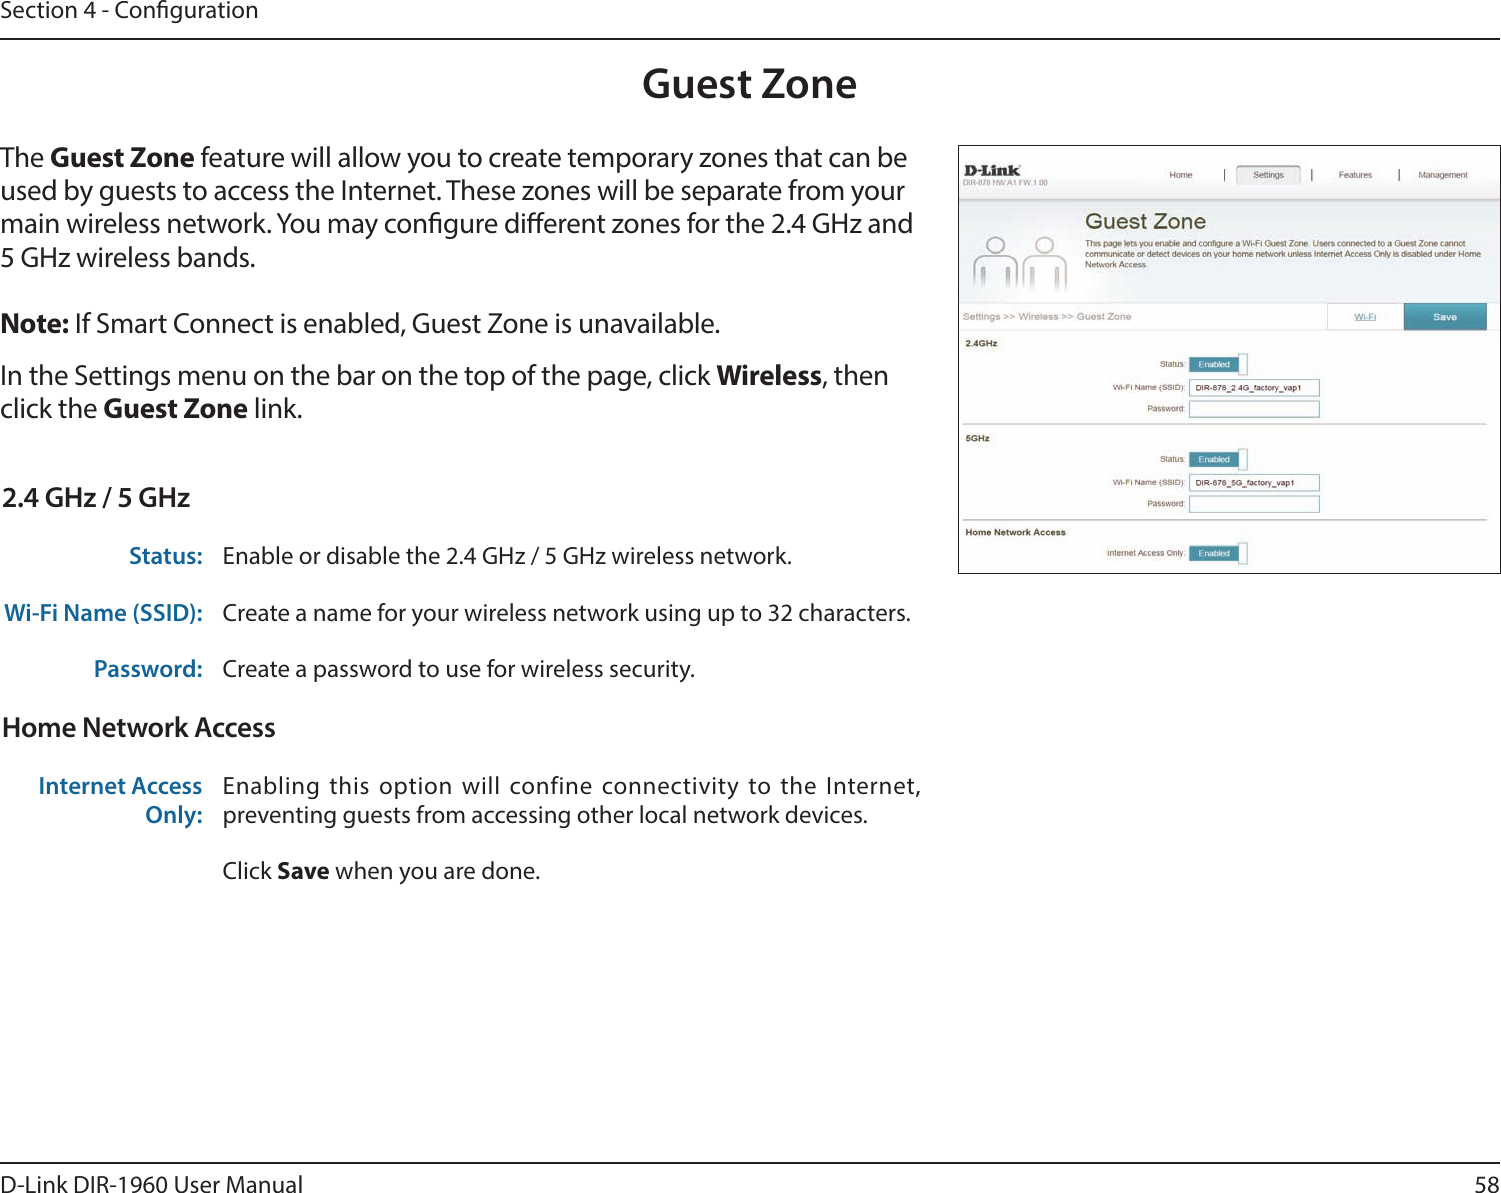 58D-Link DIR-1960 User ManualSection 4 - CongurationGuest ZoneIn the Settings menu on the bar on the top of the page, click Wireless, then click the Guest Zone link. The Guest Zone feature will allow you to create temporary zones that can be used by guests to access the Internet. These zones will be separate from your main wireless network. You may congure dierent zones for the 2.4 GHz and 5 GHz wireless bands.Note: If Smart Connect is enabled, Guest Zone is unavailable.2.4 GHz / 5 GHzStatus: Enable or disable the 2.4 GHz / 5 GHz wireless network.Wi-Fi Name (SSID): Create a name for your wireless network using up to 32 characters. Password: Create a password to use for wireless security. Home Network AccessInternet Access Only:Enabling this option will confine connectivity to the Internet, preventing guests from accessing other local network devices.Click Save when you are done.